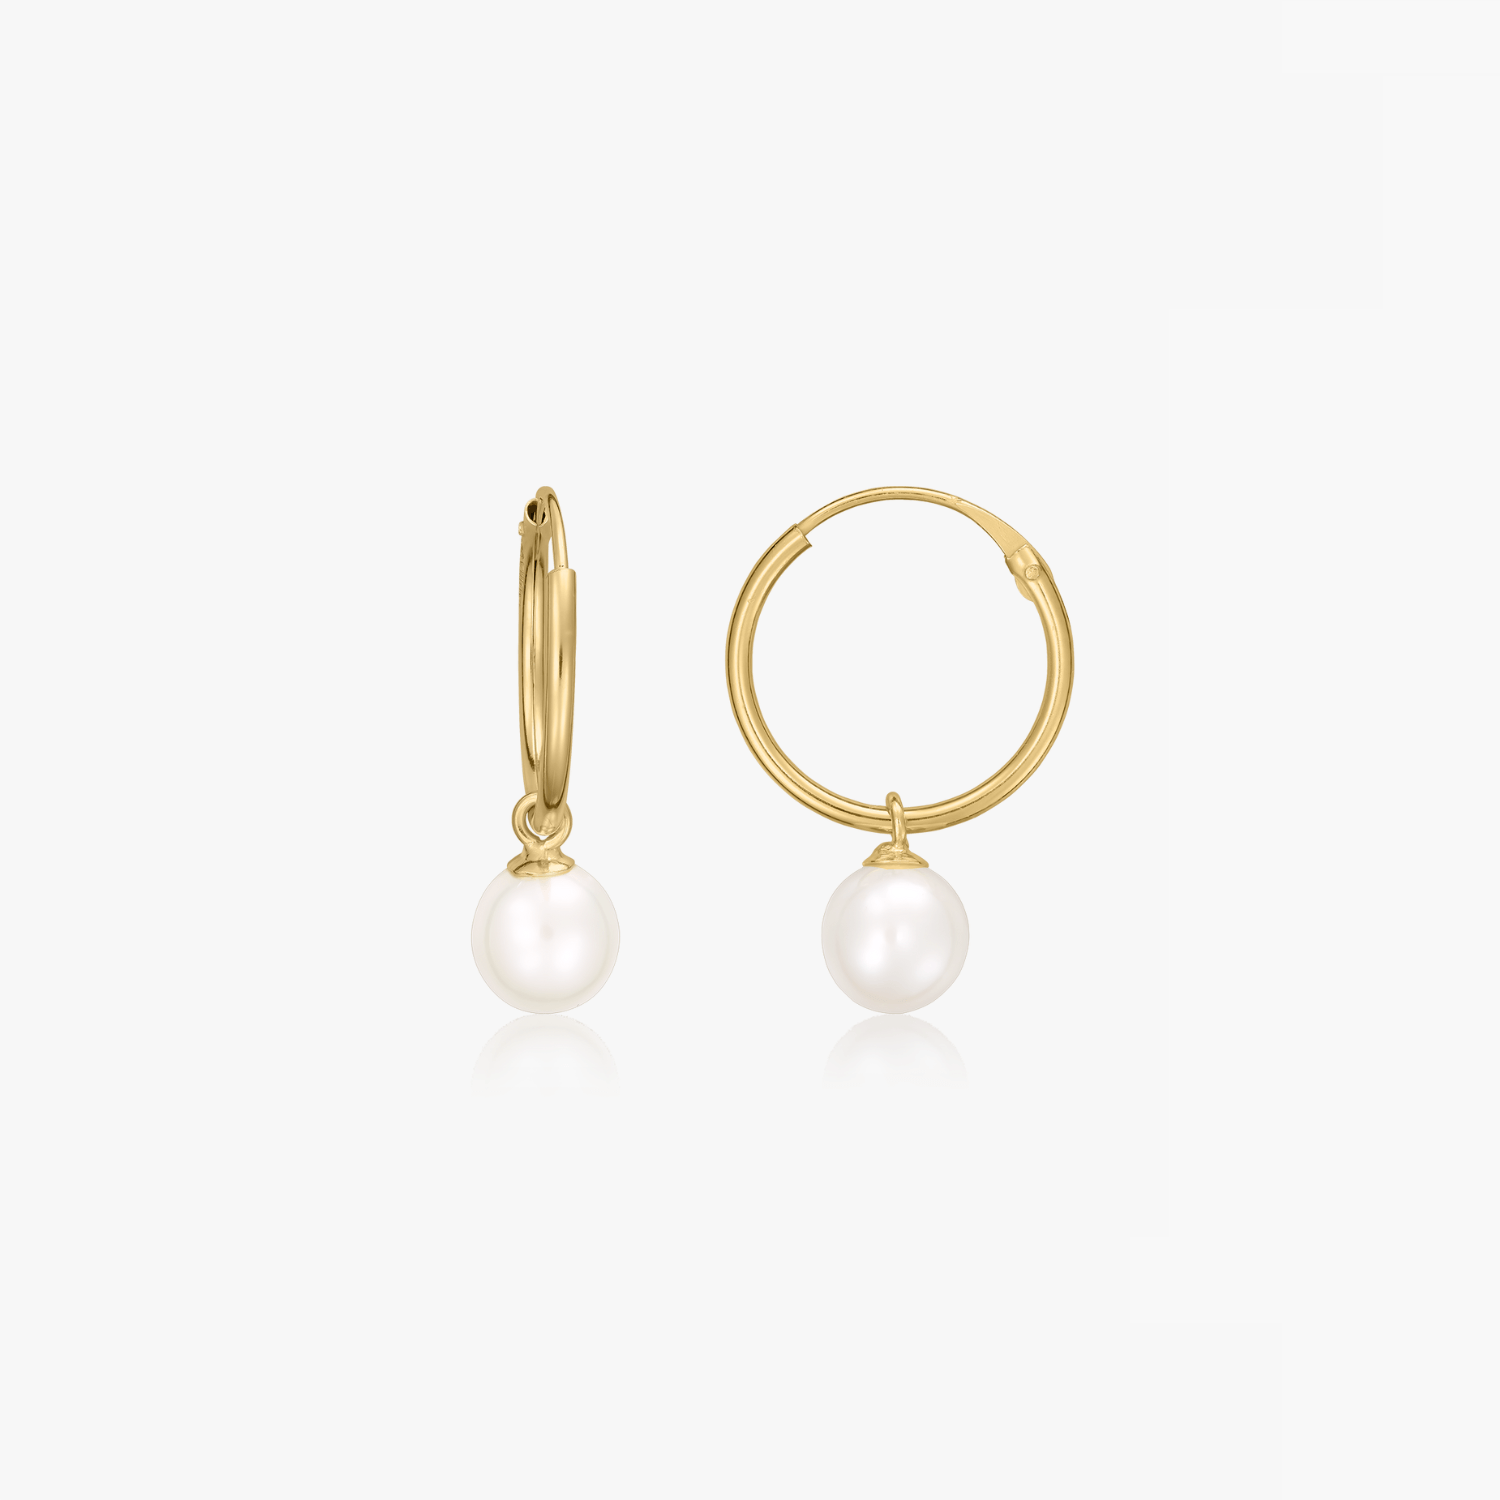 Little Drop Gold Earrings - Natural Pearls